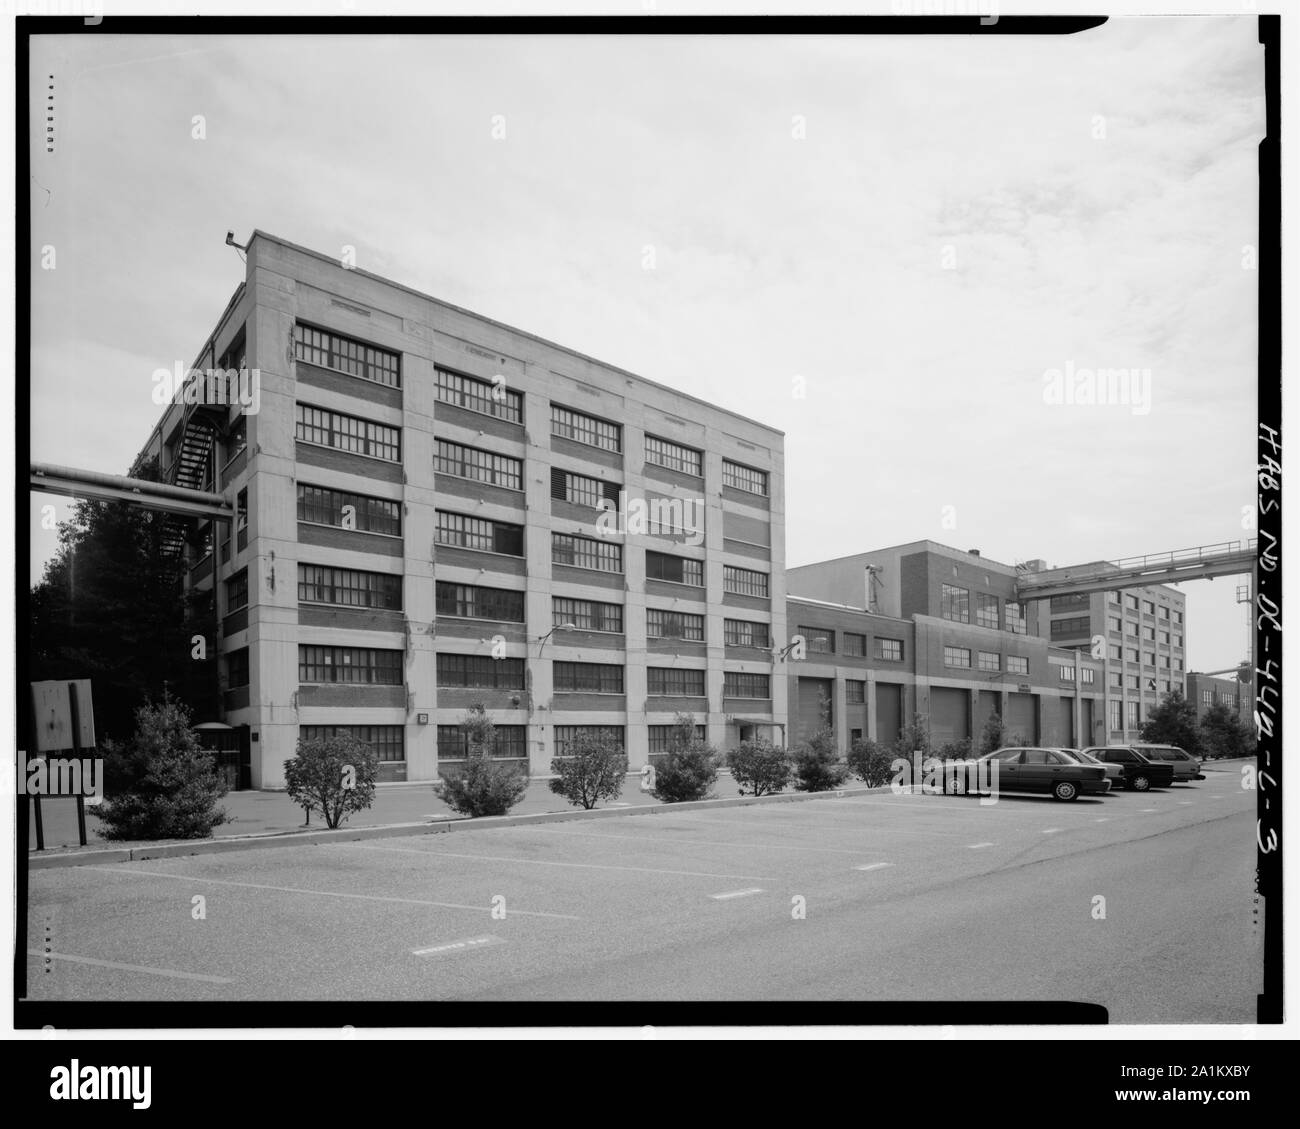 North and west elevations, looking southeast - Navy Yard, Building No. 143; North and west elevations, looking southeast - Navy Yard, Building No. 143, Between Isaac Hull & Patterson Avenues, Washington, District of Columbia, DC; Stock Photo